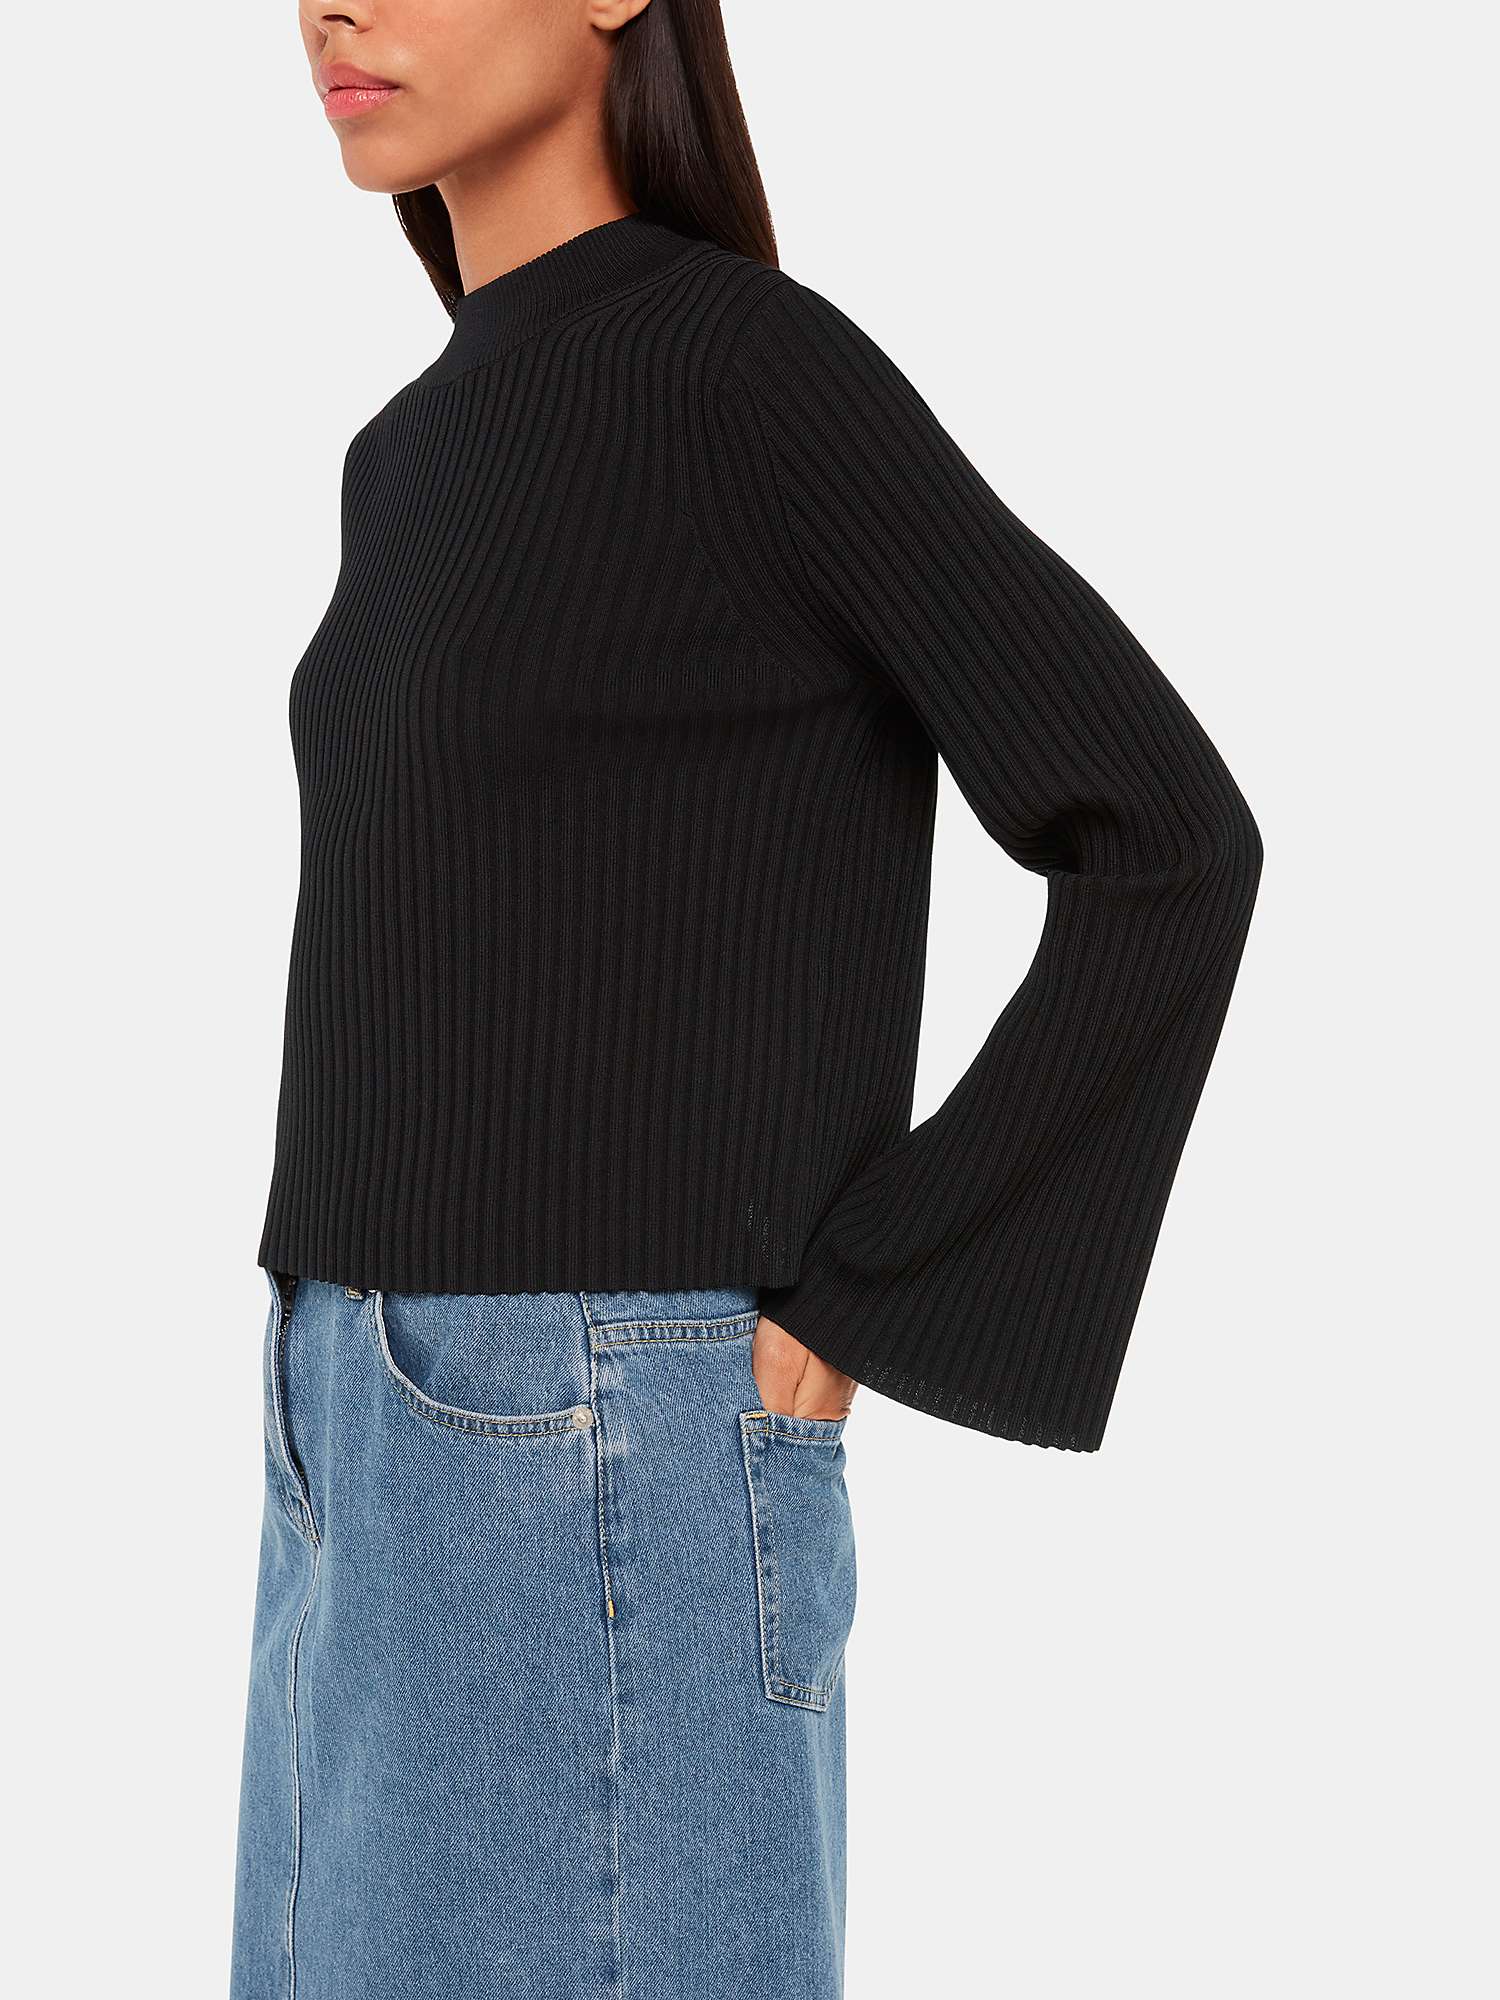 Buy Whistles Fluted Sleeve Knit Tunic Top, Black Online at johnlewis.com